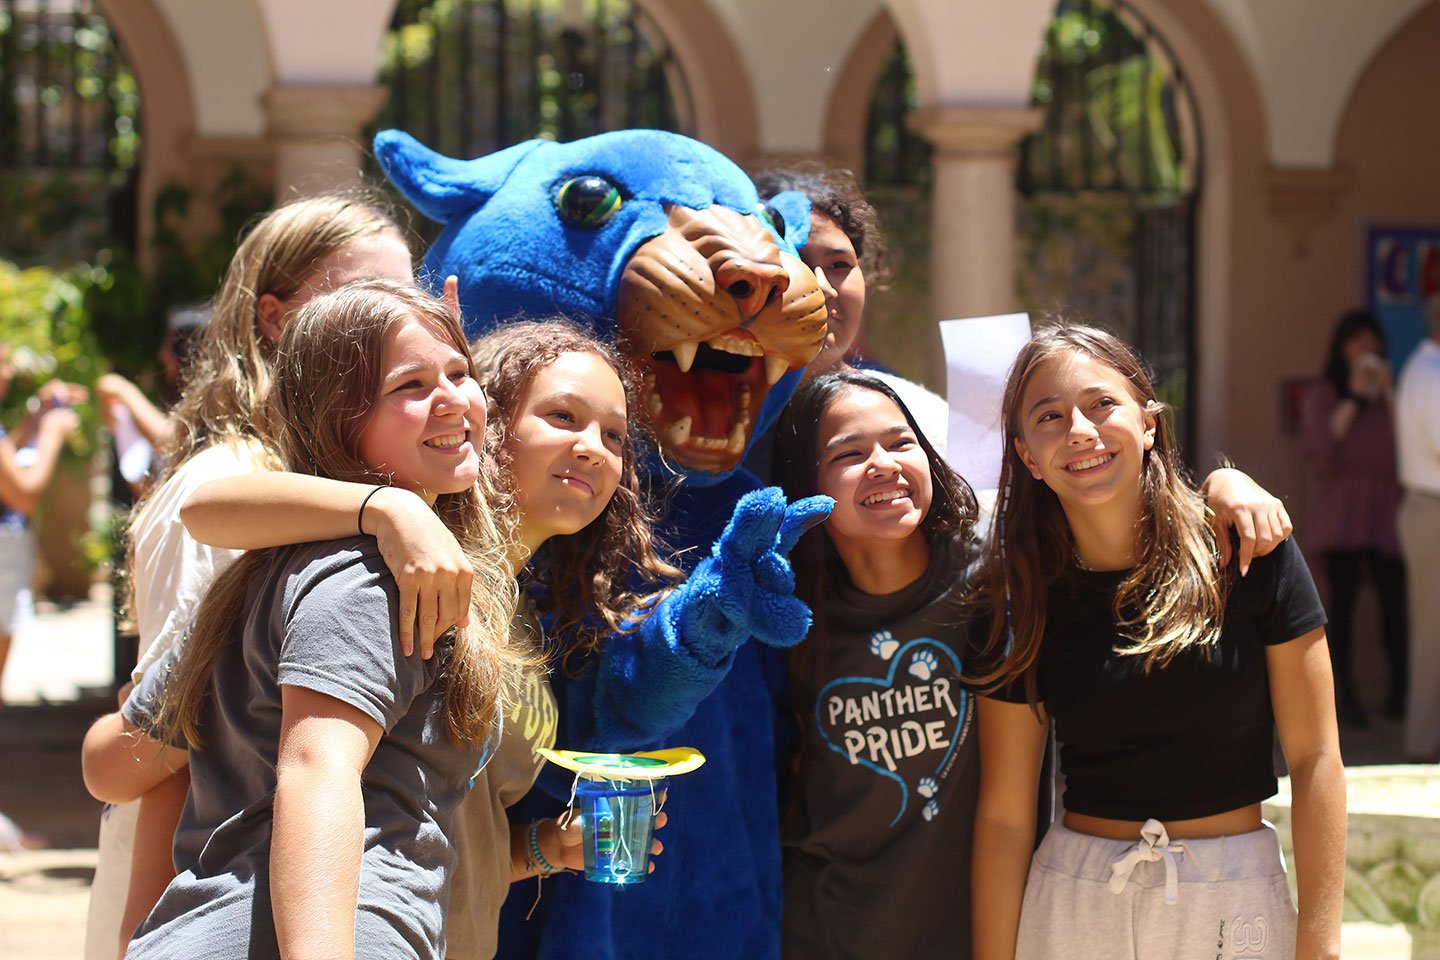 Students pose and celebrate with the La Pietra Panther.